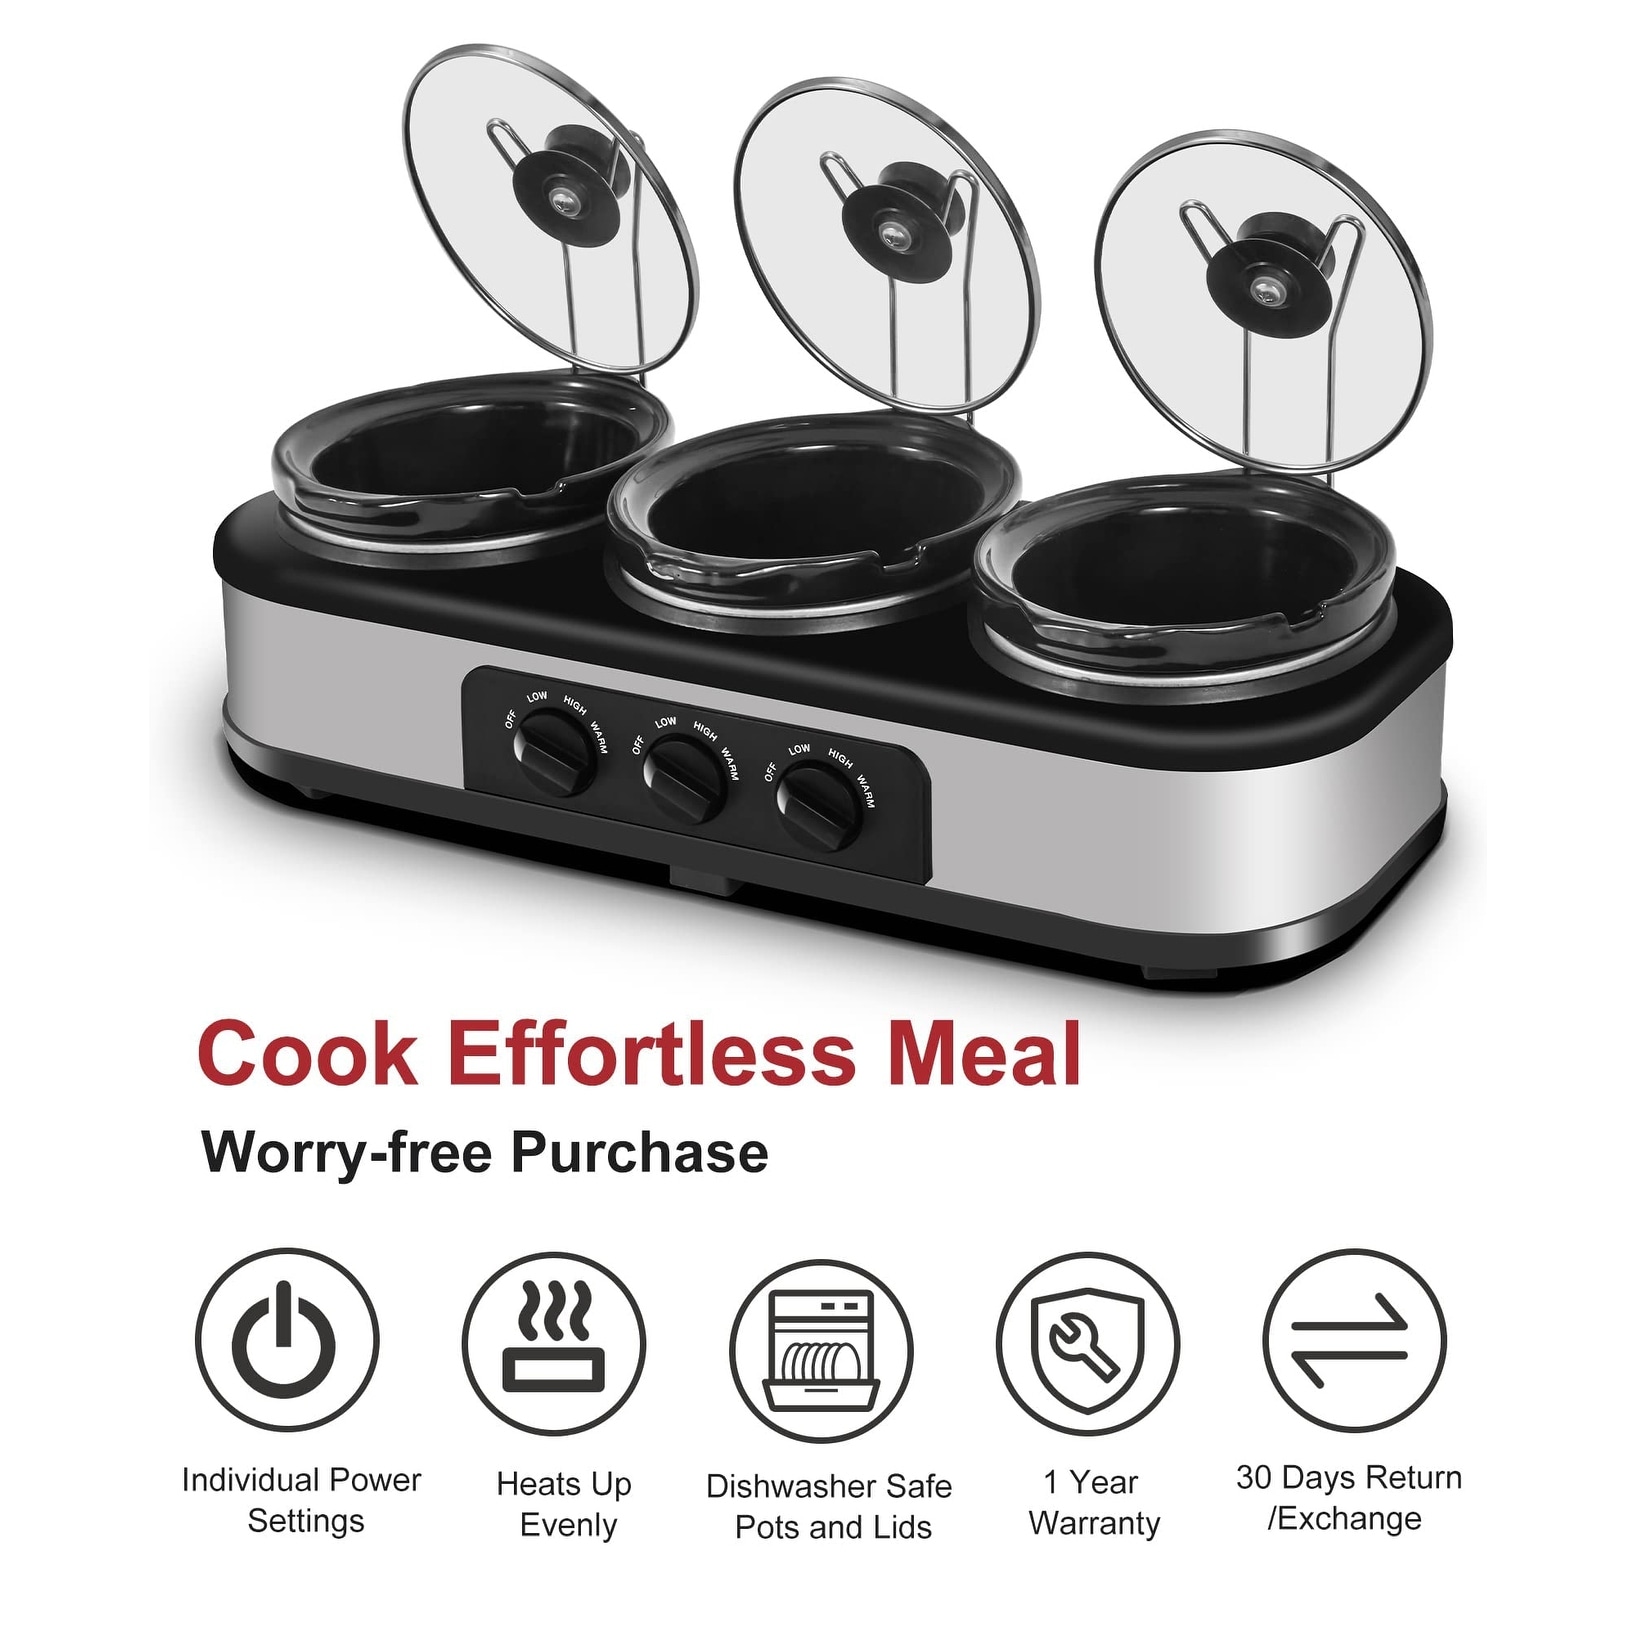  Triple Slow Cooker with Lid Rests, Breakfast Buffet Servers and  Warmers with 3 X 1.5Qt, Tempered glass lids & 3 Adjustable Temp, Dishwasher  Safe, Stainless Steel: Home & Kitchen